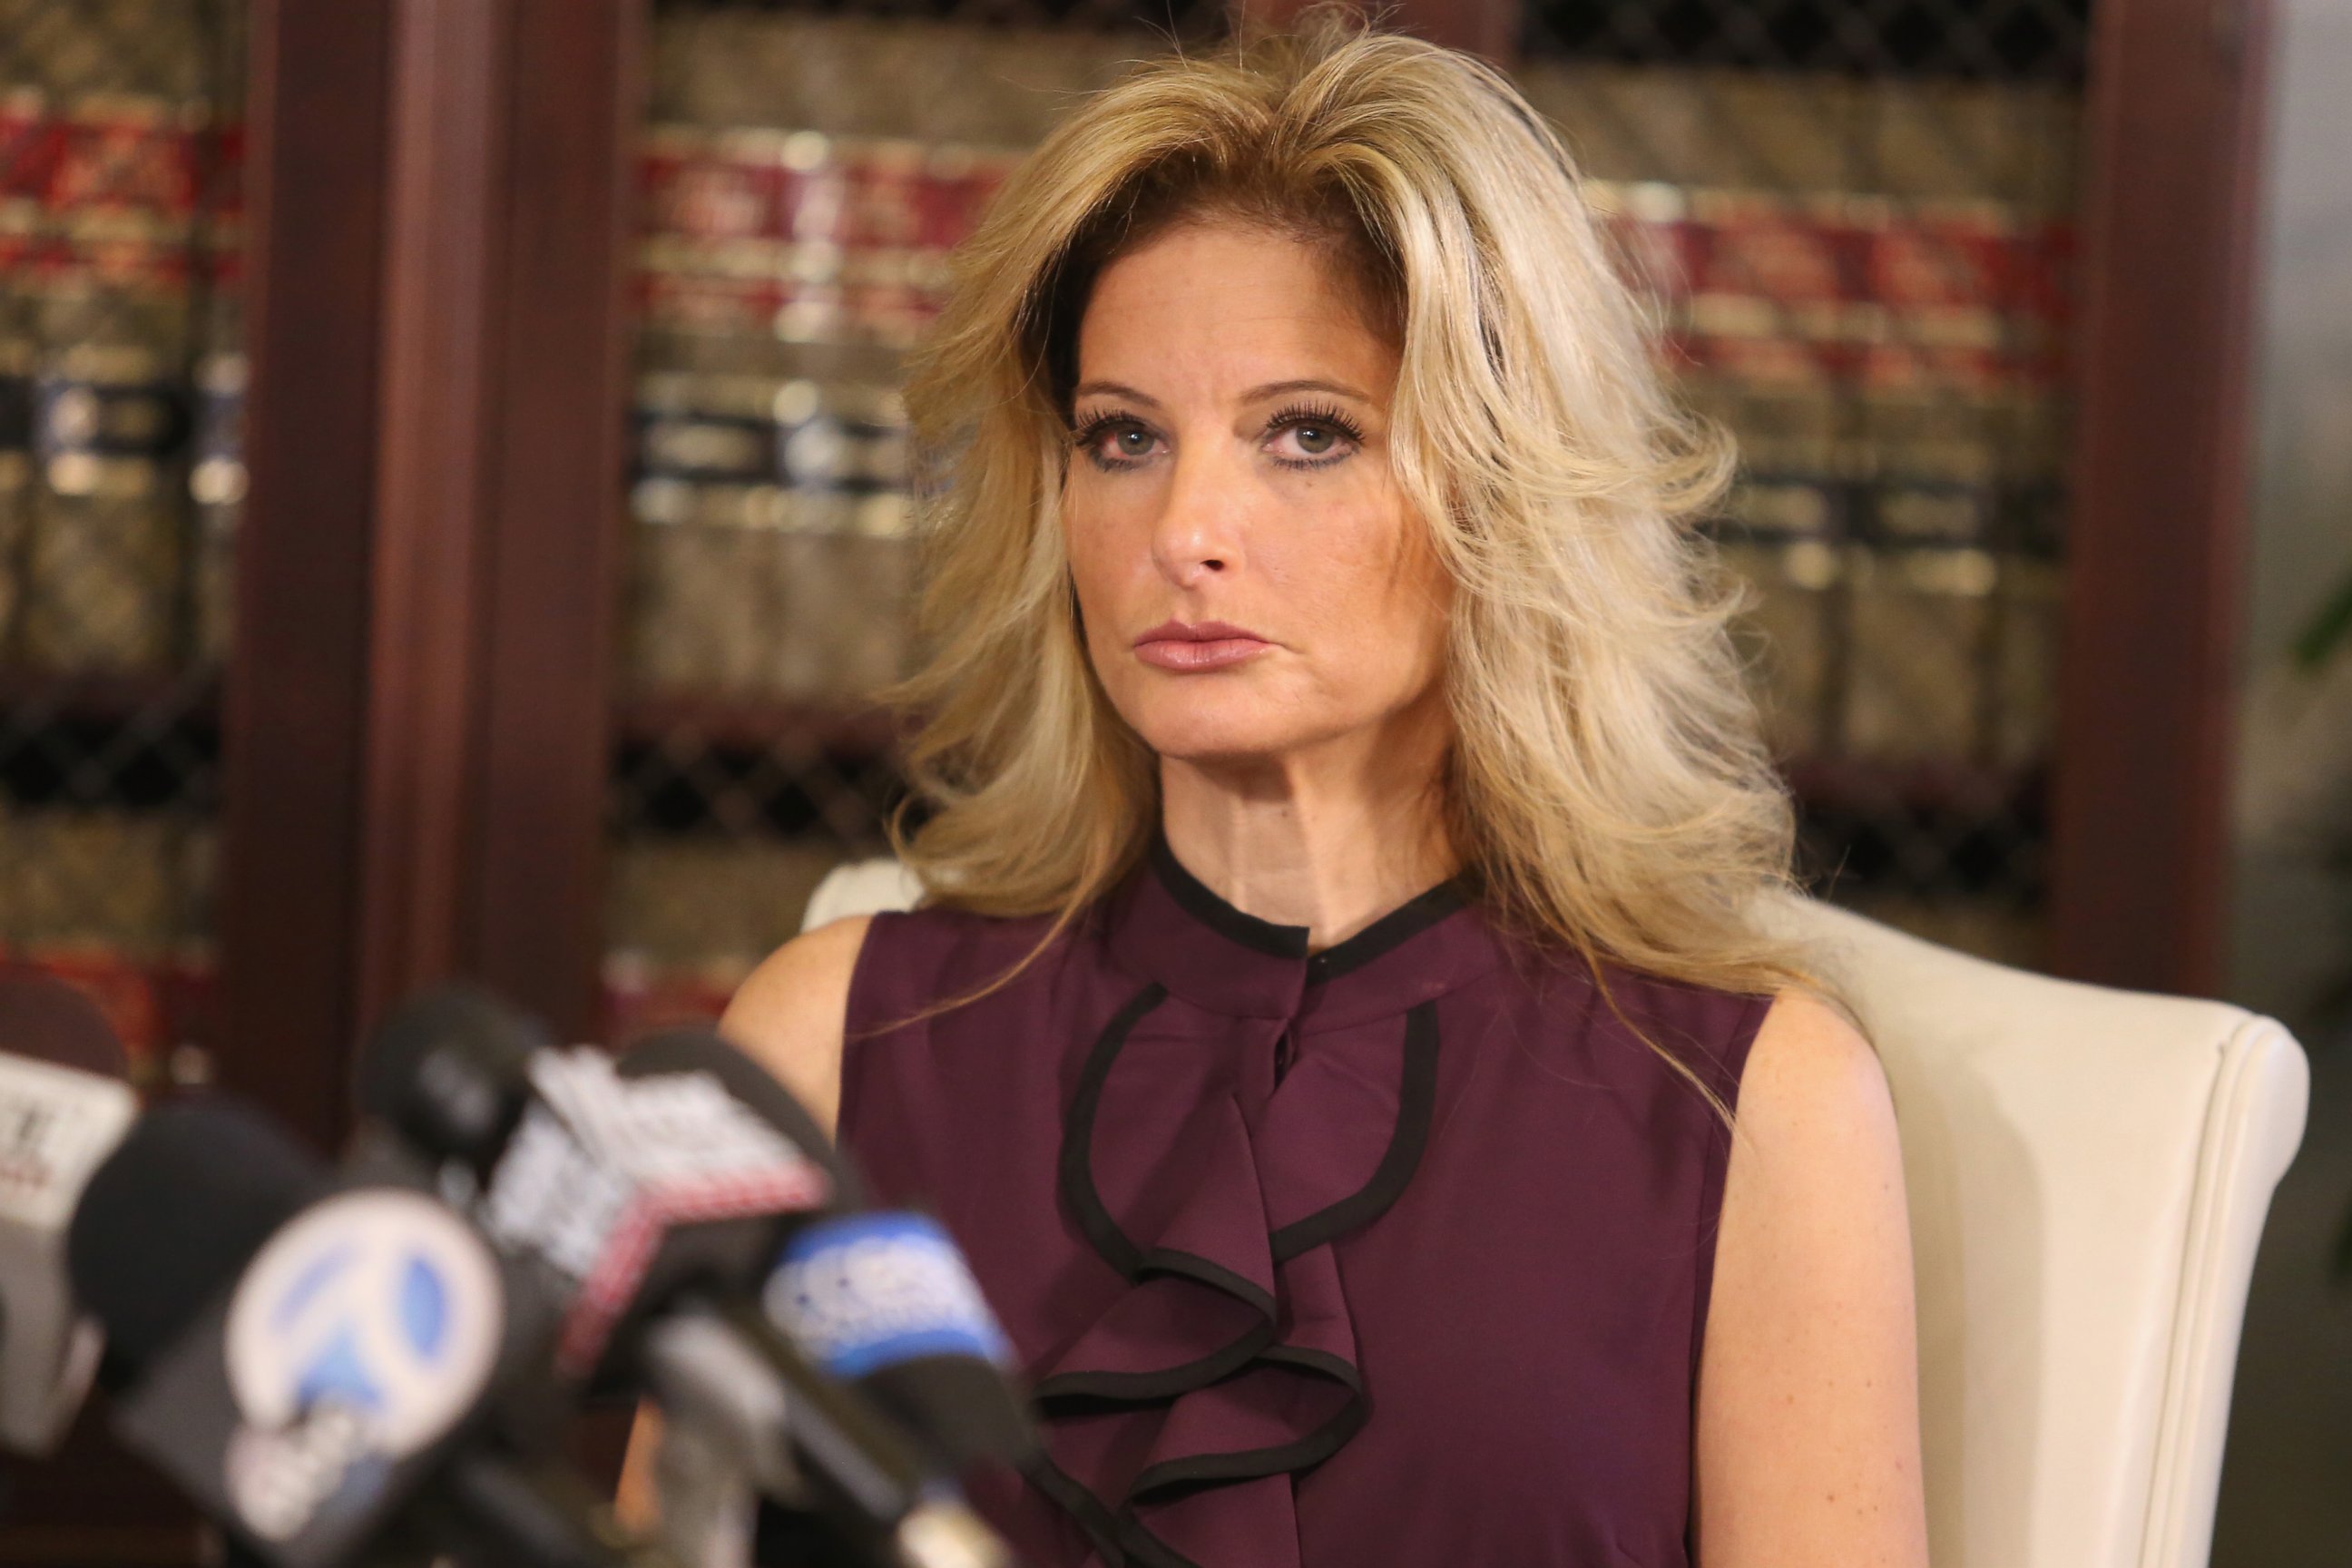 PHOTO: Summer Zervos, a former candidate on "The Apprentice" season five, who is accusing Donald Trump of inappropriate sexual conduct, speaks to the press with her attorney Gloria Allred, Oct. 14, 2016 in Los Angeles. 